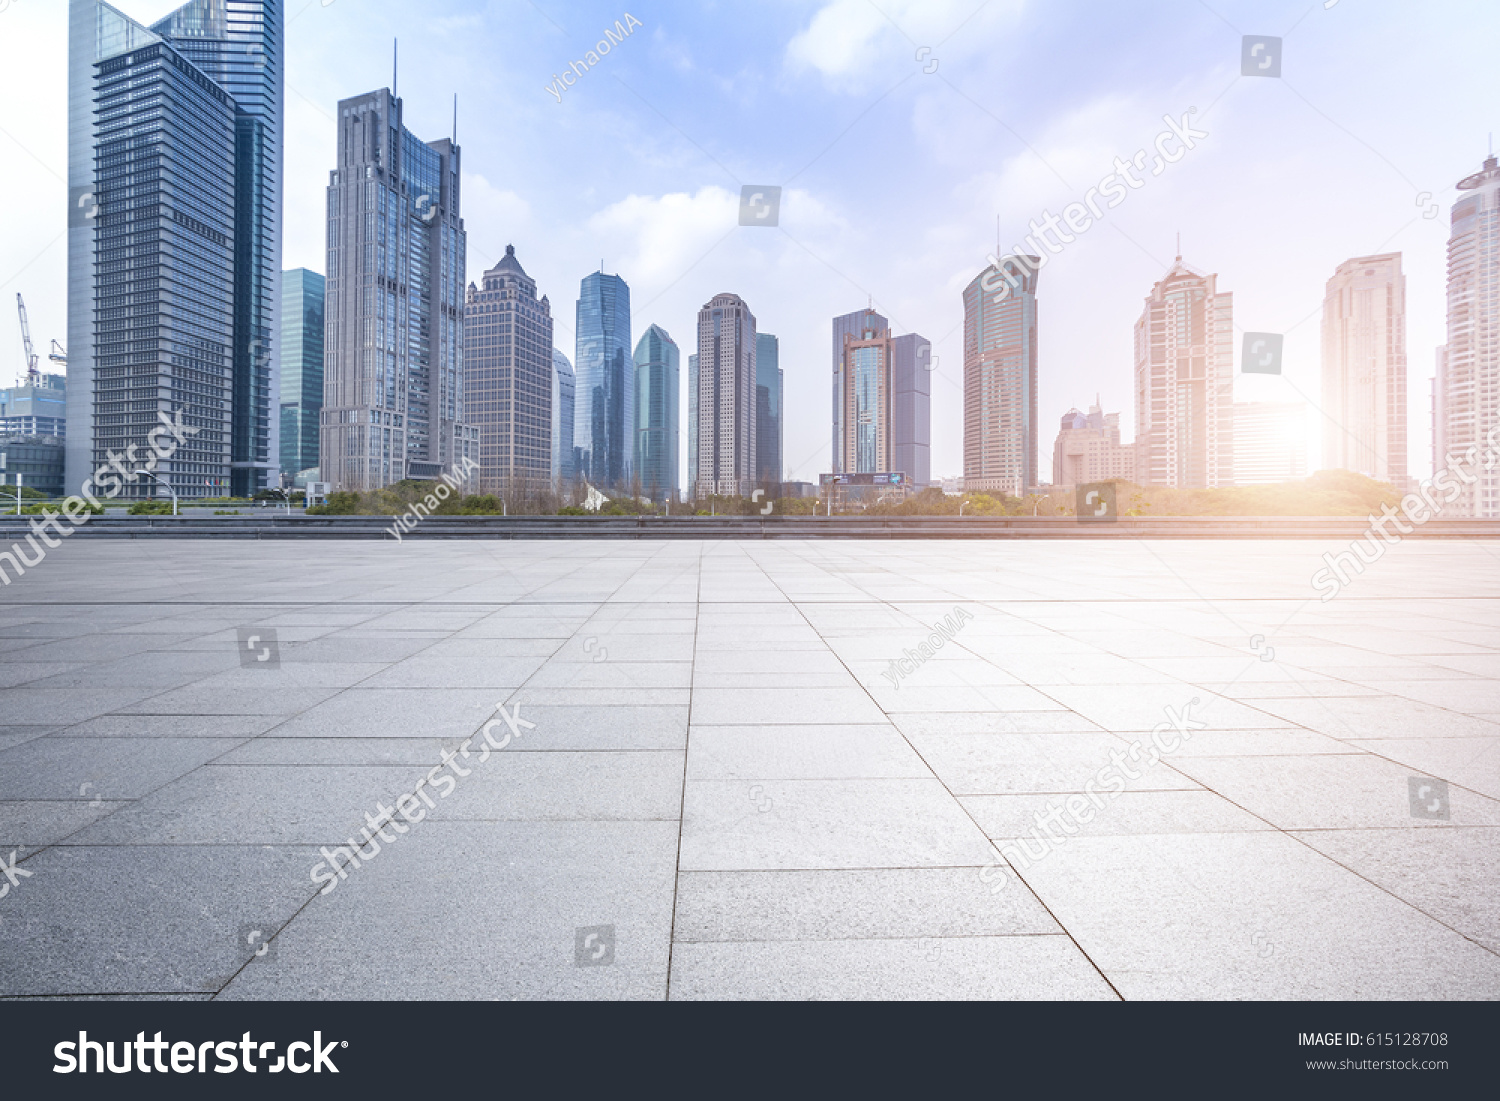 Panoramic skyline and buildings with empty concrete square floor #615128708